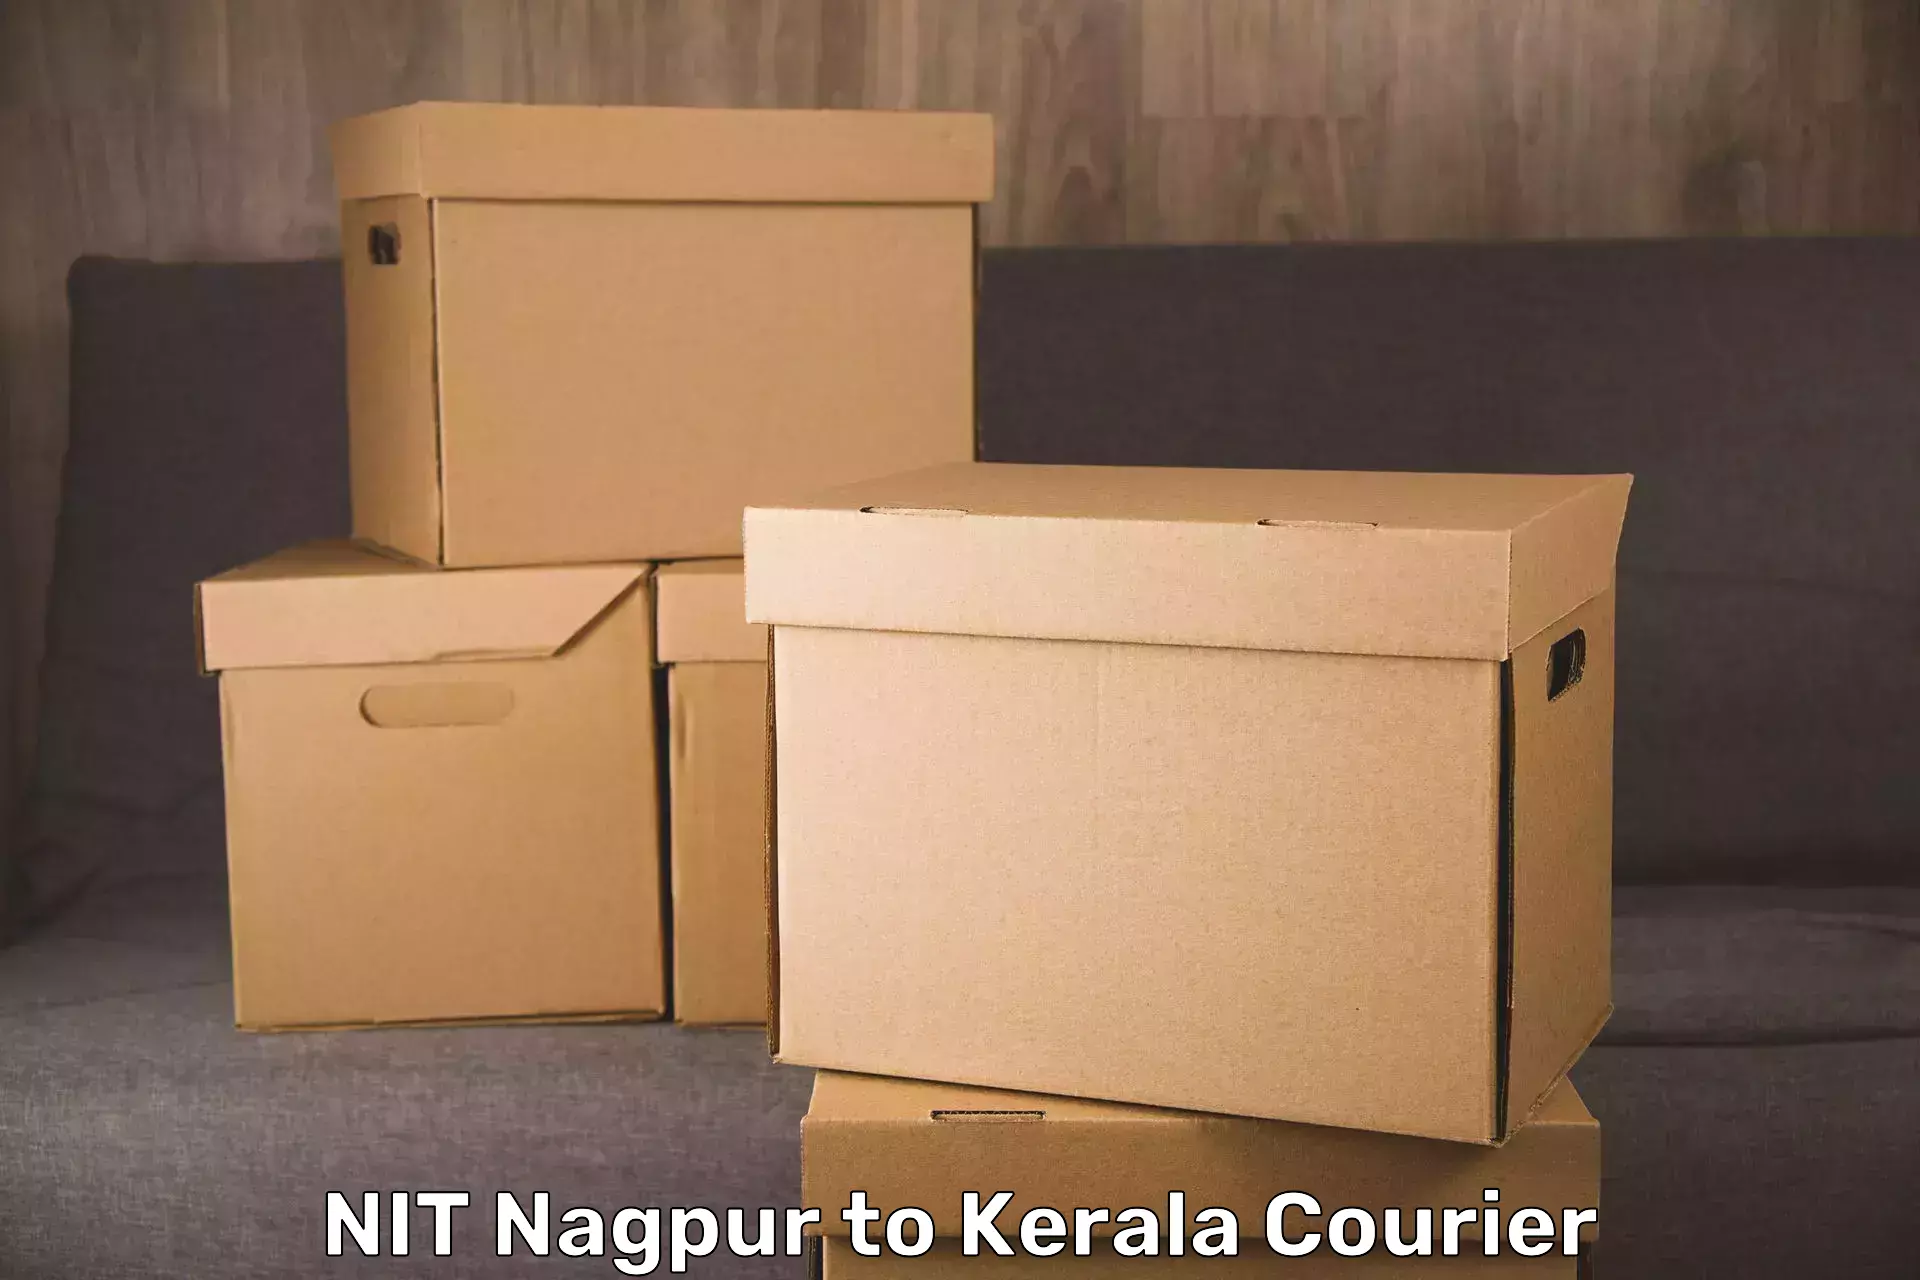 Airport luggage delivery NIT Nagpur to Kochi